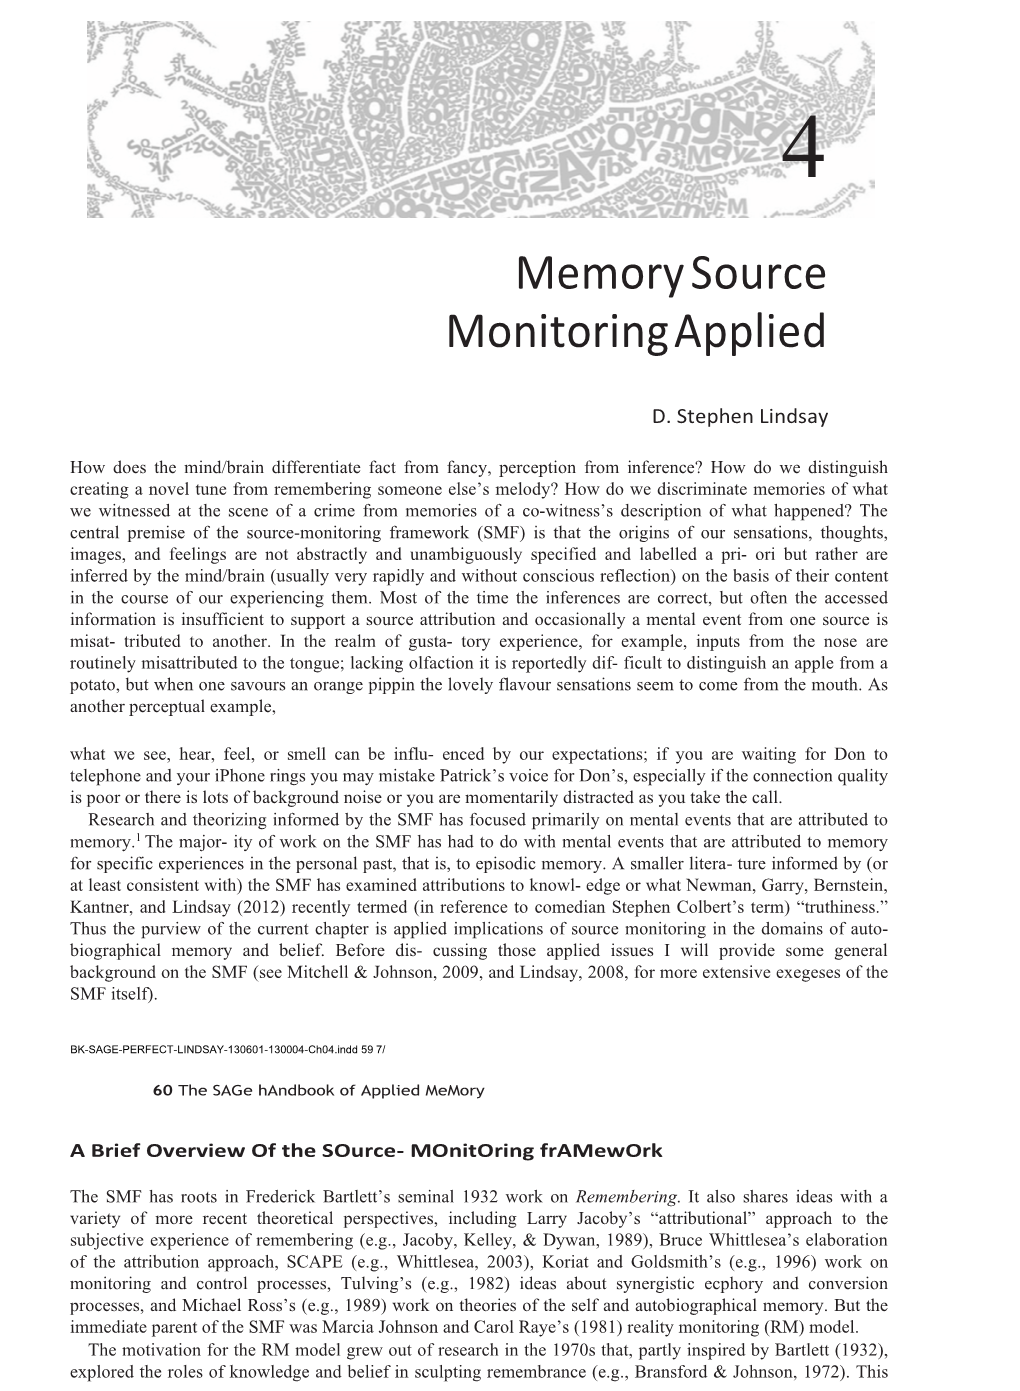 Memory Source Monitoring Applied